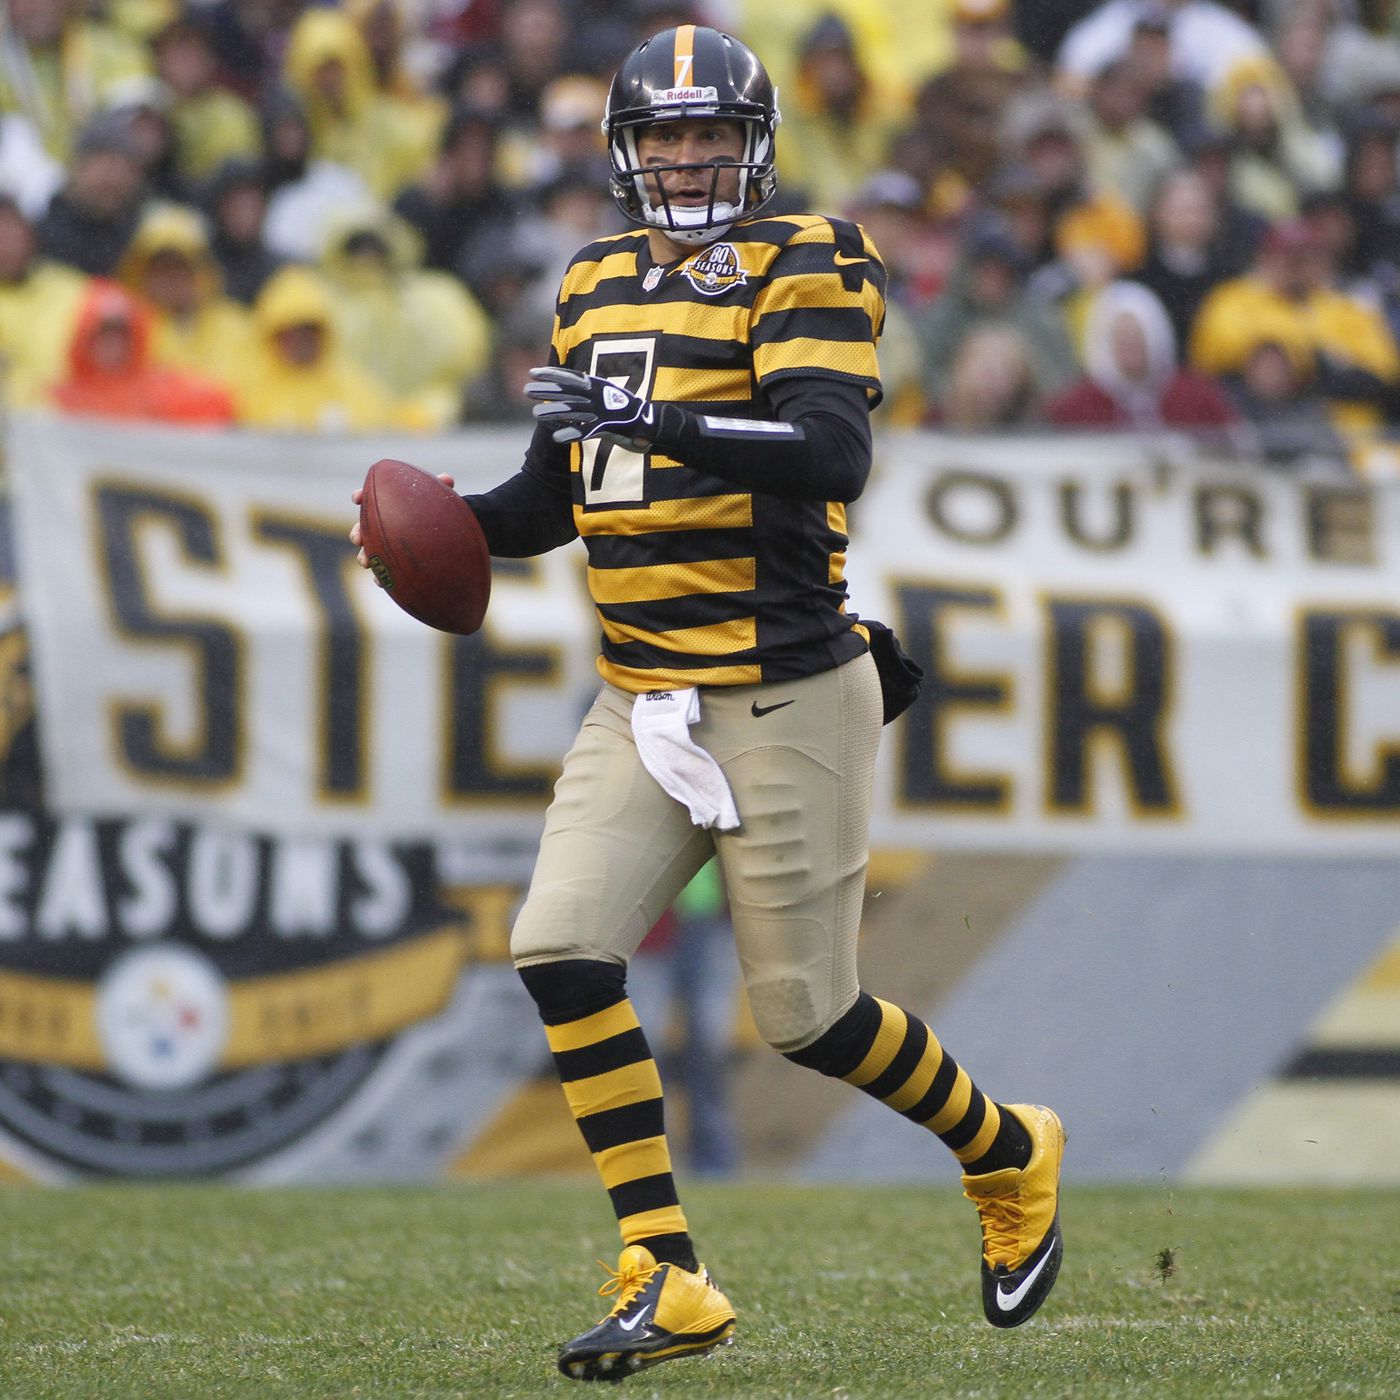 The Steelers are unveiling new throwback uniforms but what will